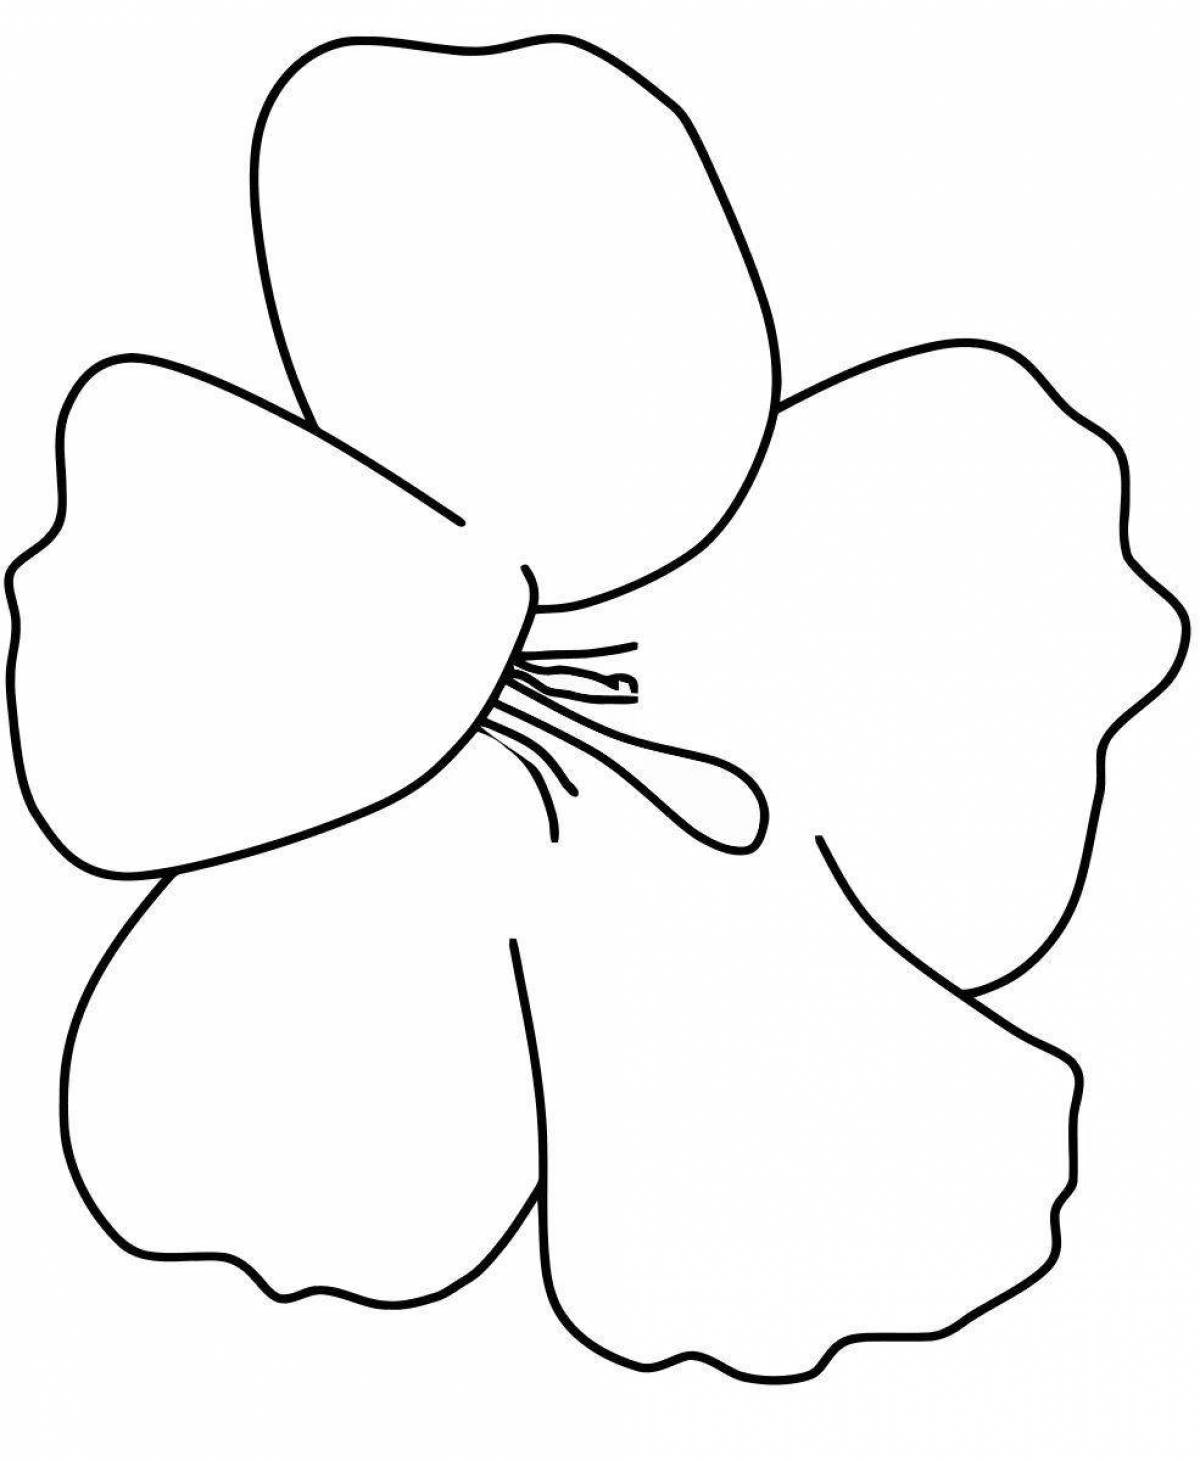 Coloring page cheerful flower pattern